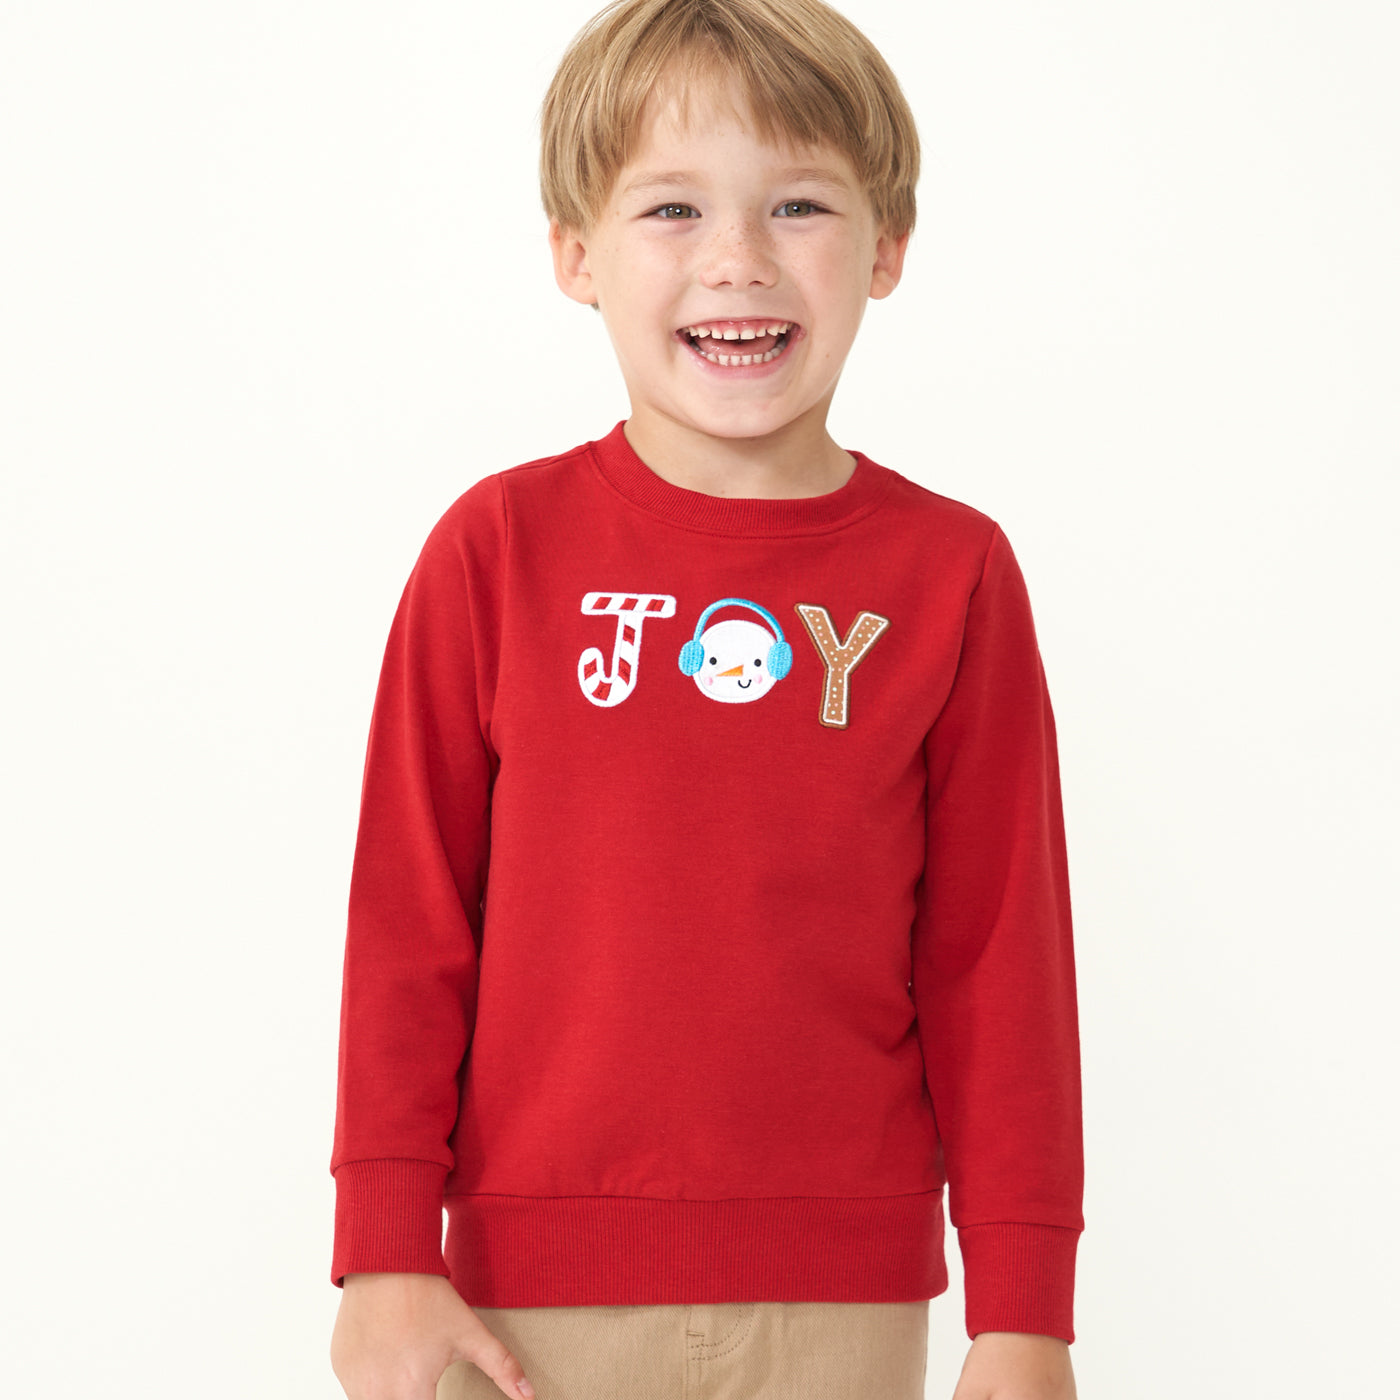 Child wearing a Holiday Red Joy crewneck 